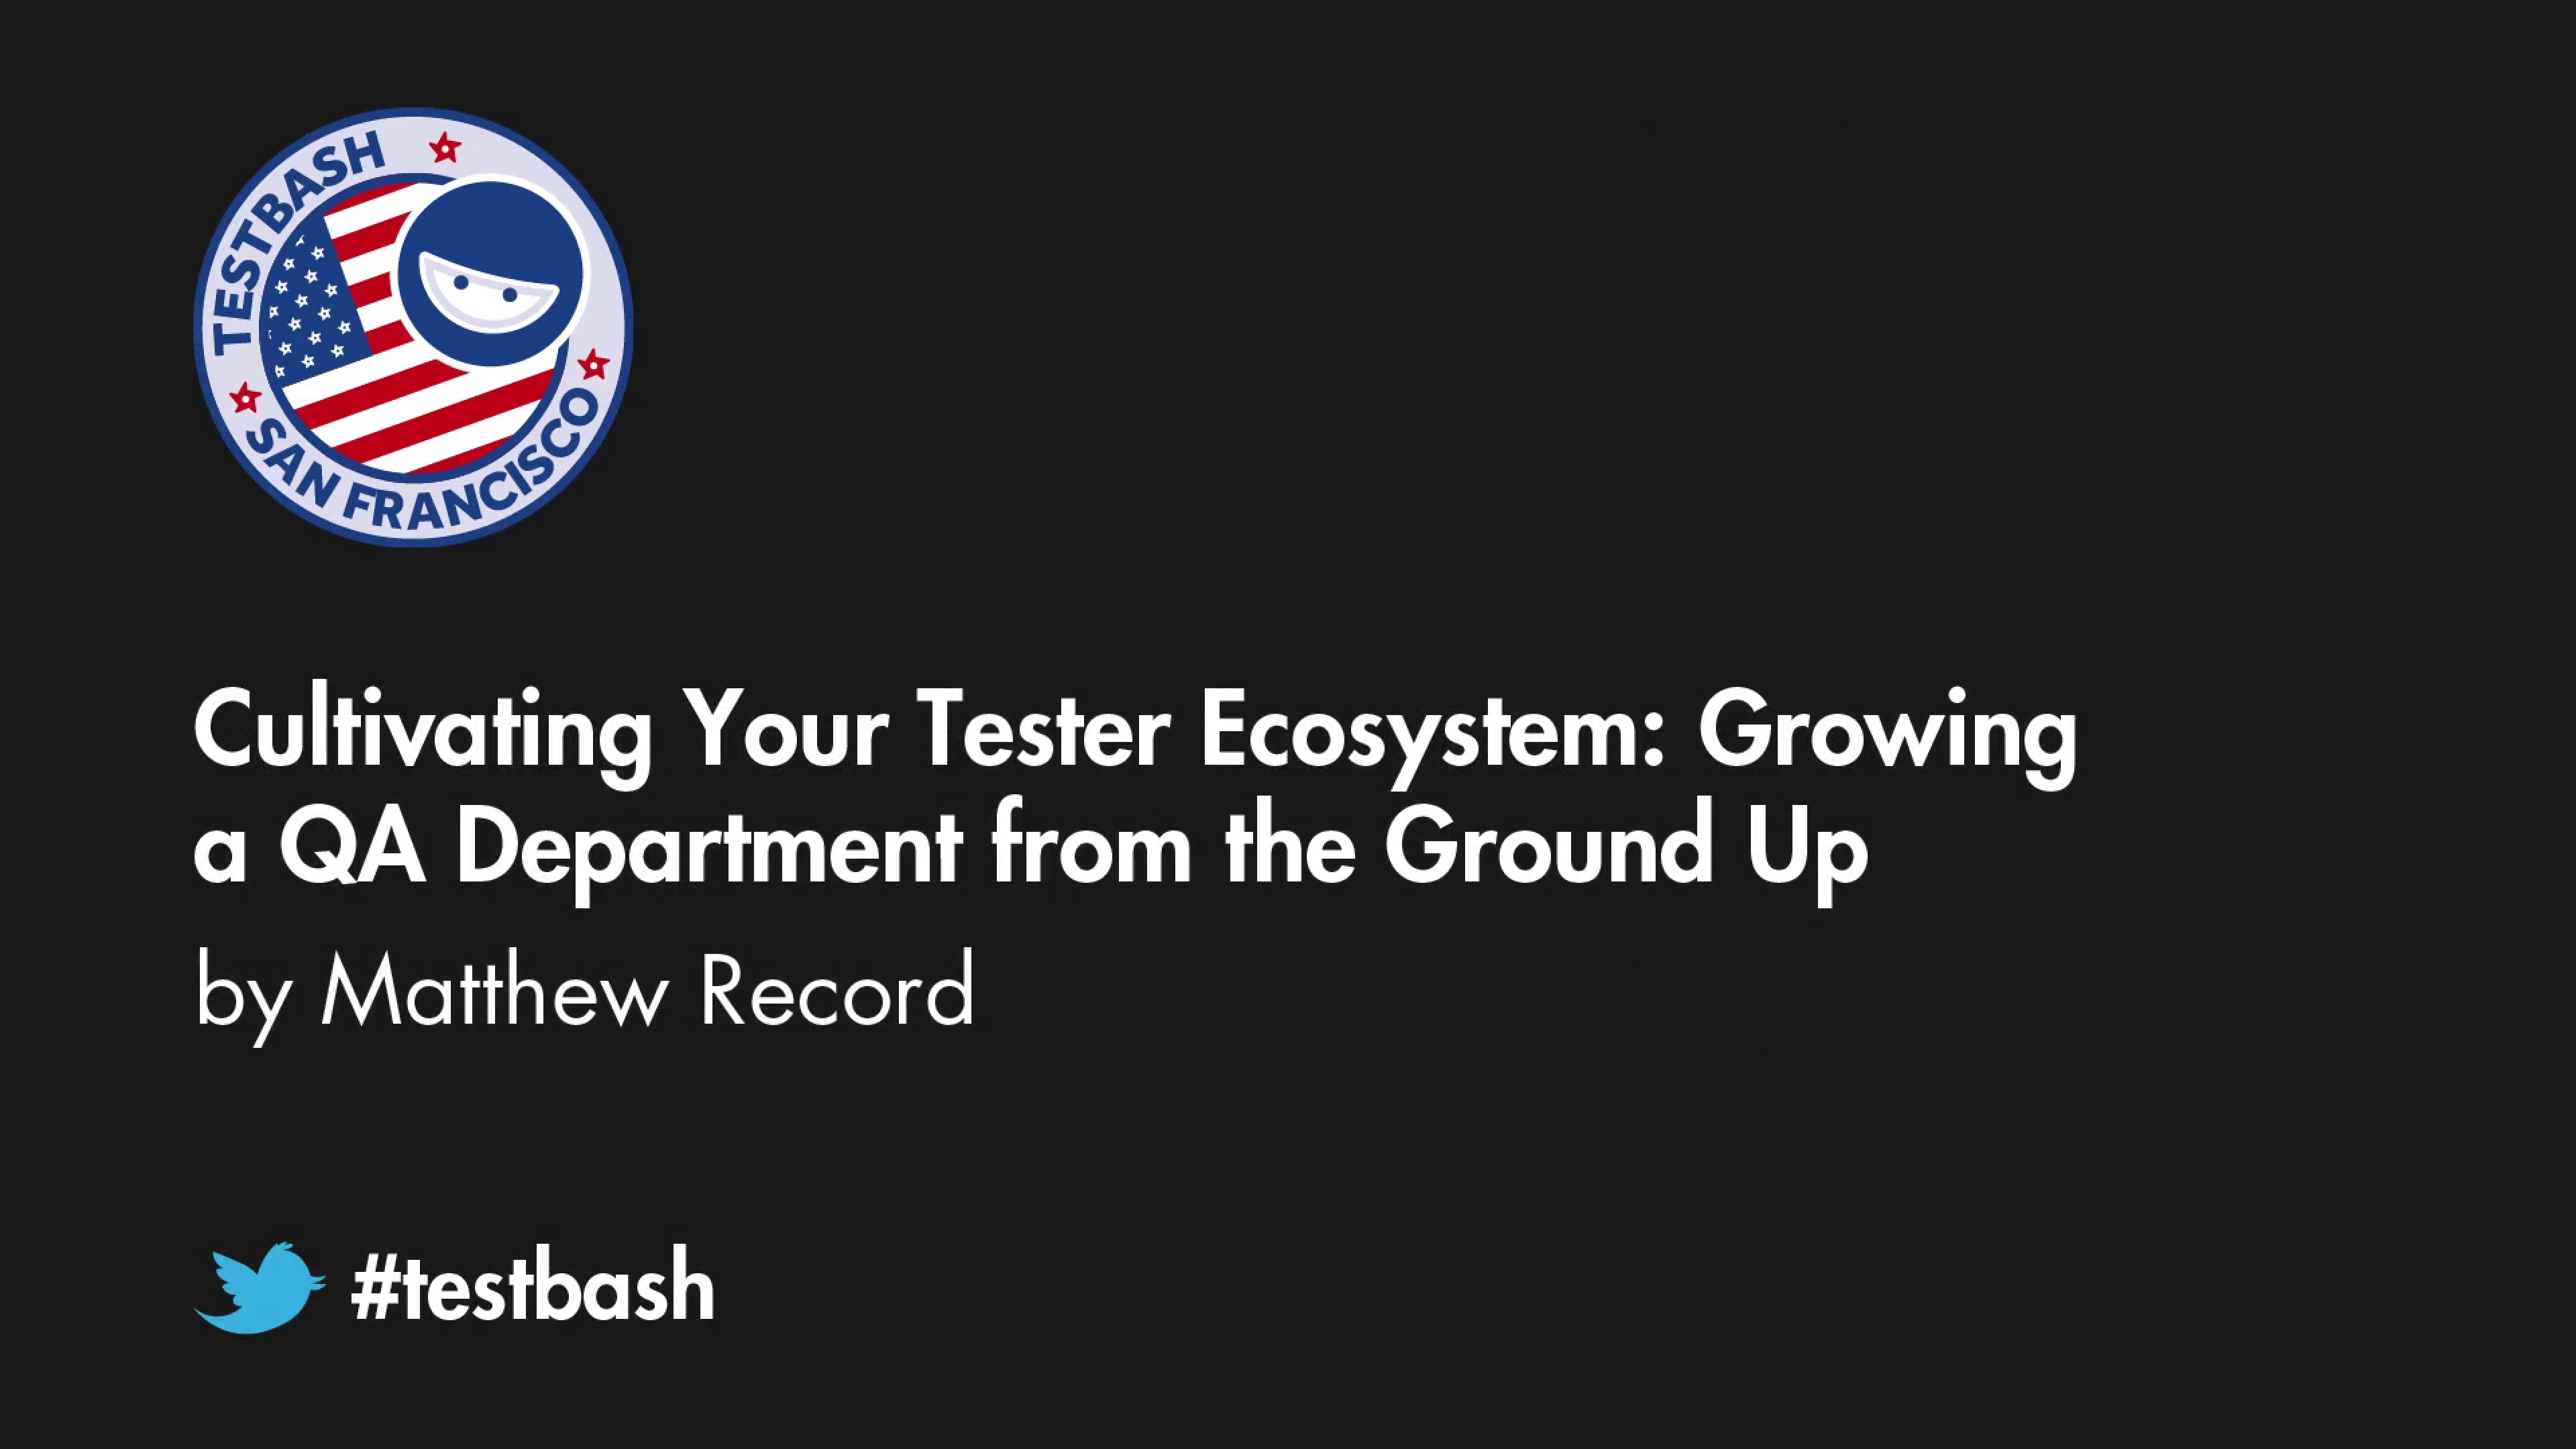 Cultivating Your Tester Ecosystem: Growing a QA Department from the Ground Up - Matthew Record